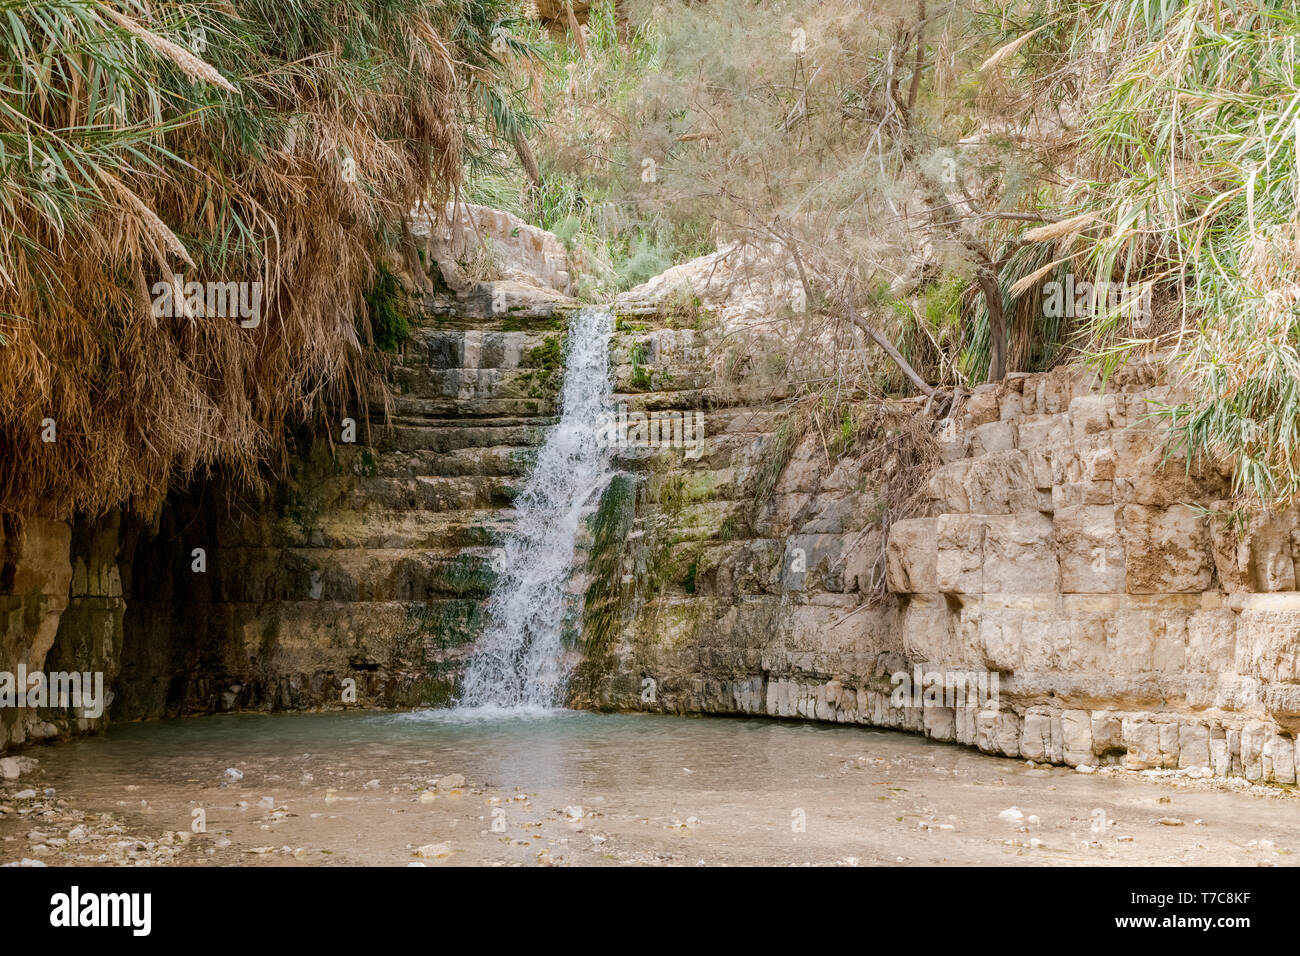 The Waterfall in national park Ein Gedi at the Dead Sea in israel Stock Photo